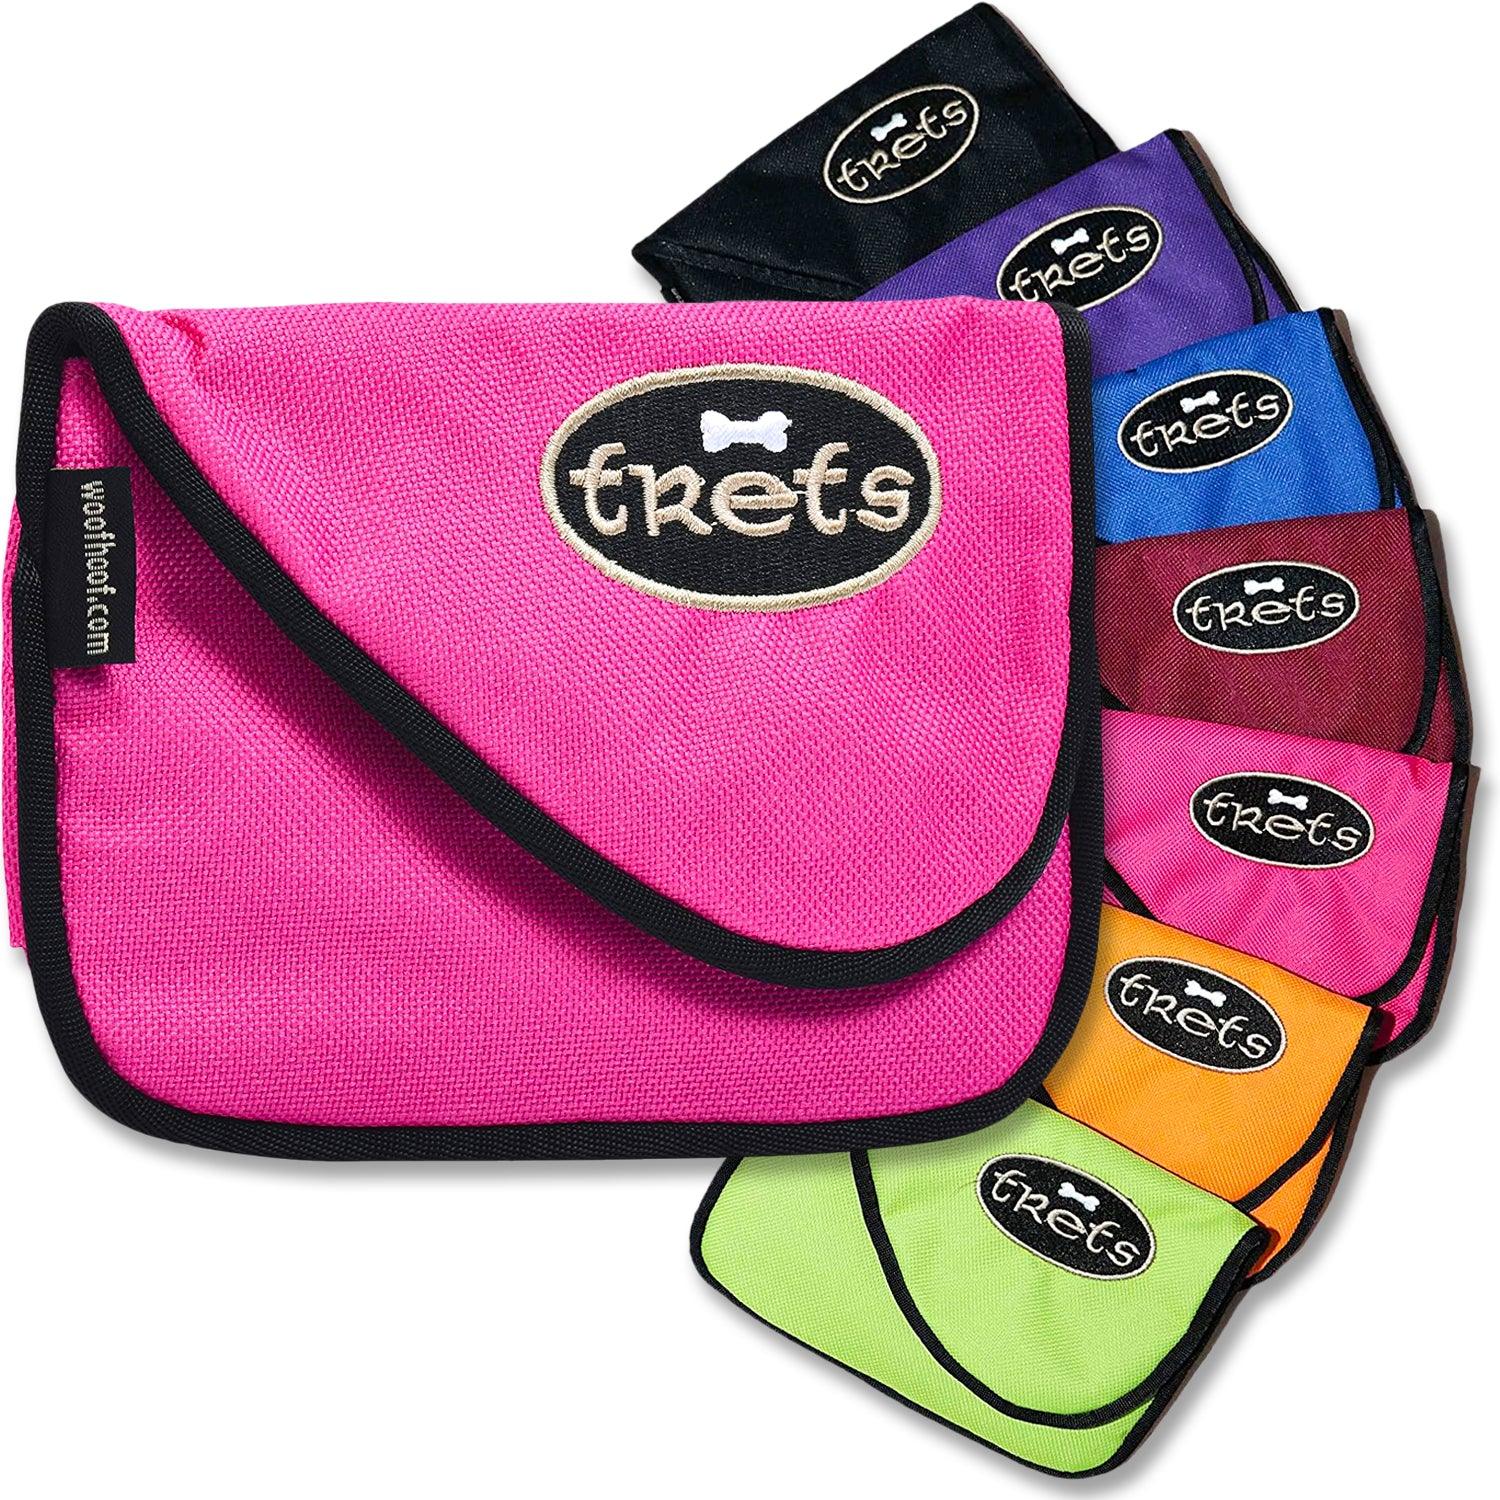 Pink bag for dog treats show with multiple color options